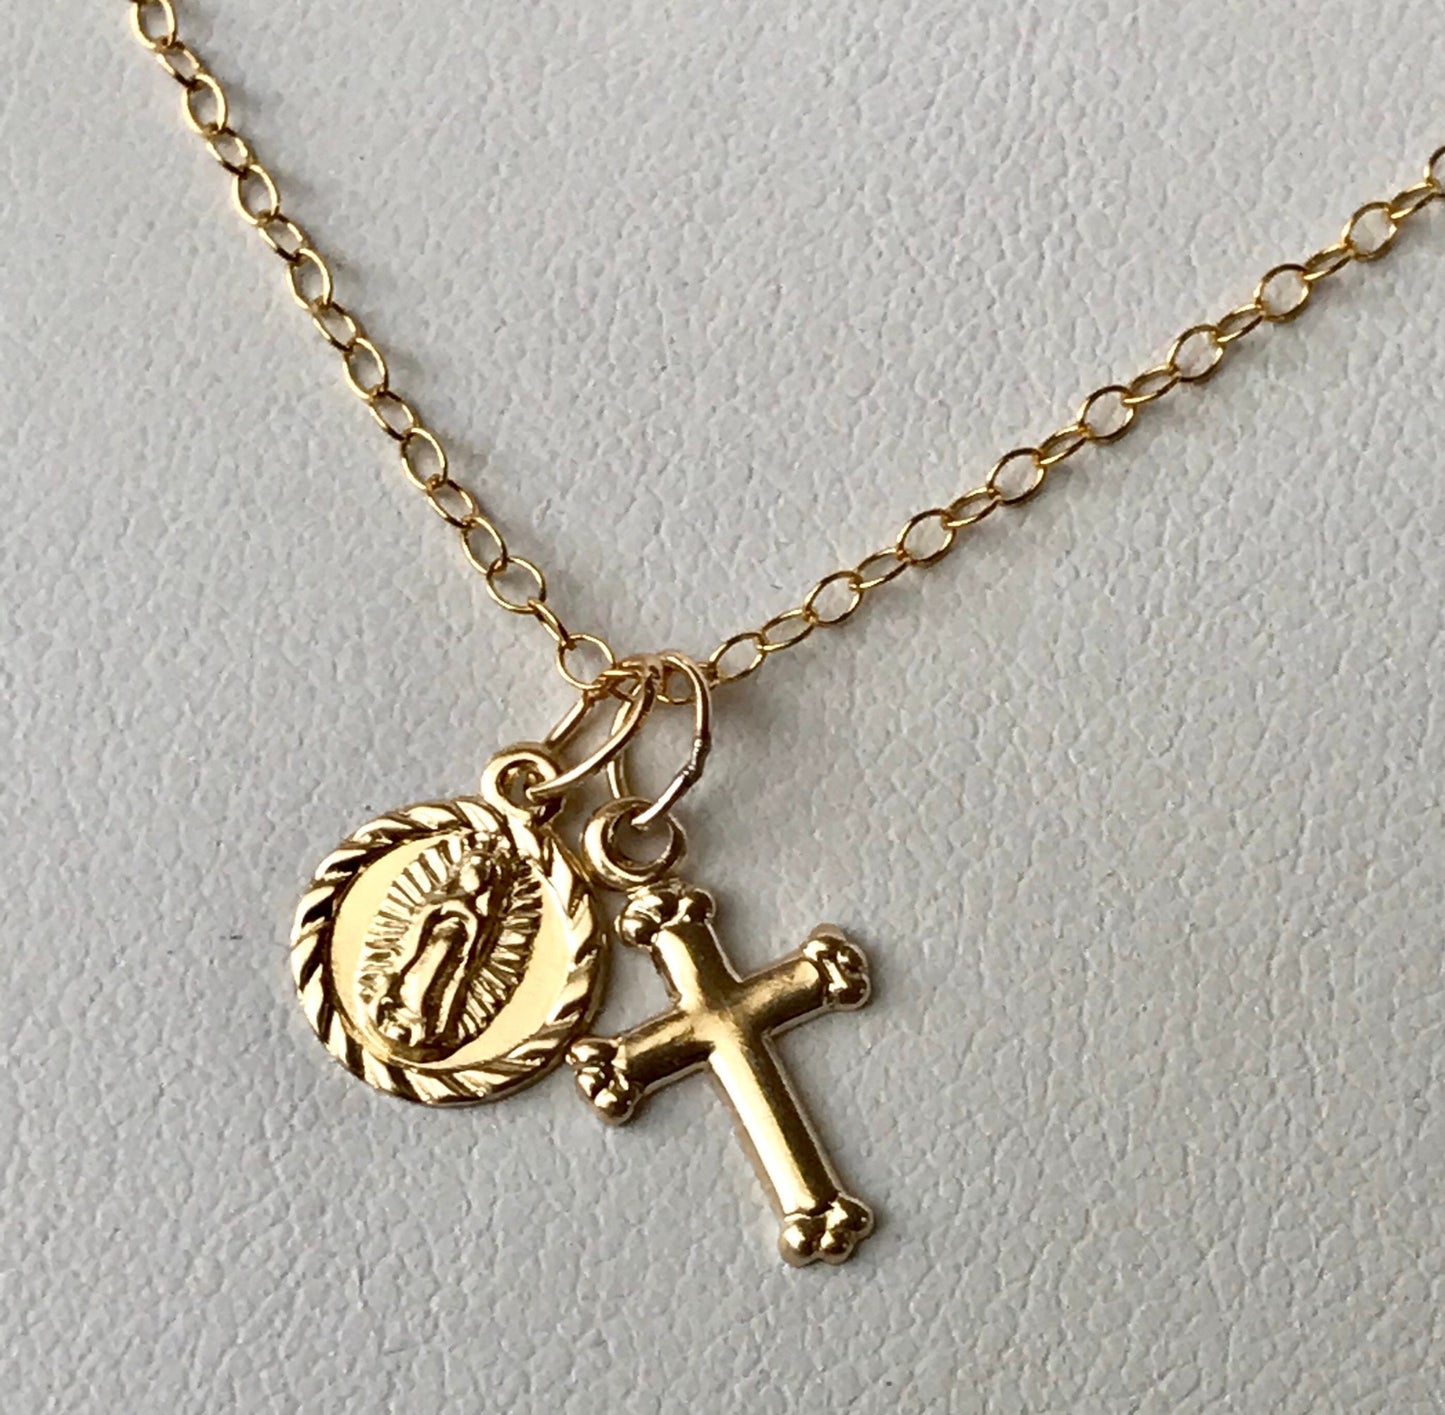 Gold and Crystal Virgin Mary Cross Necklace,Gold Cross Necklace,Confirmation Cross Necklace,First Communion Marry Necklace,Religious Jewelry